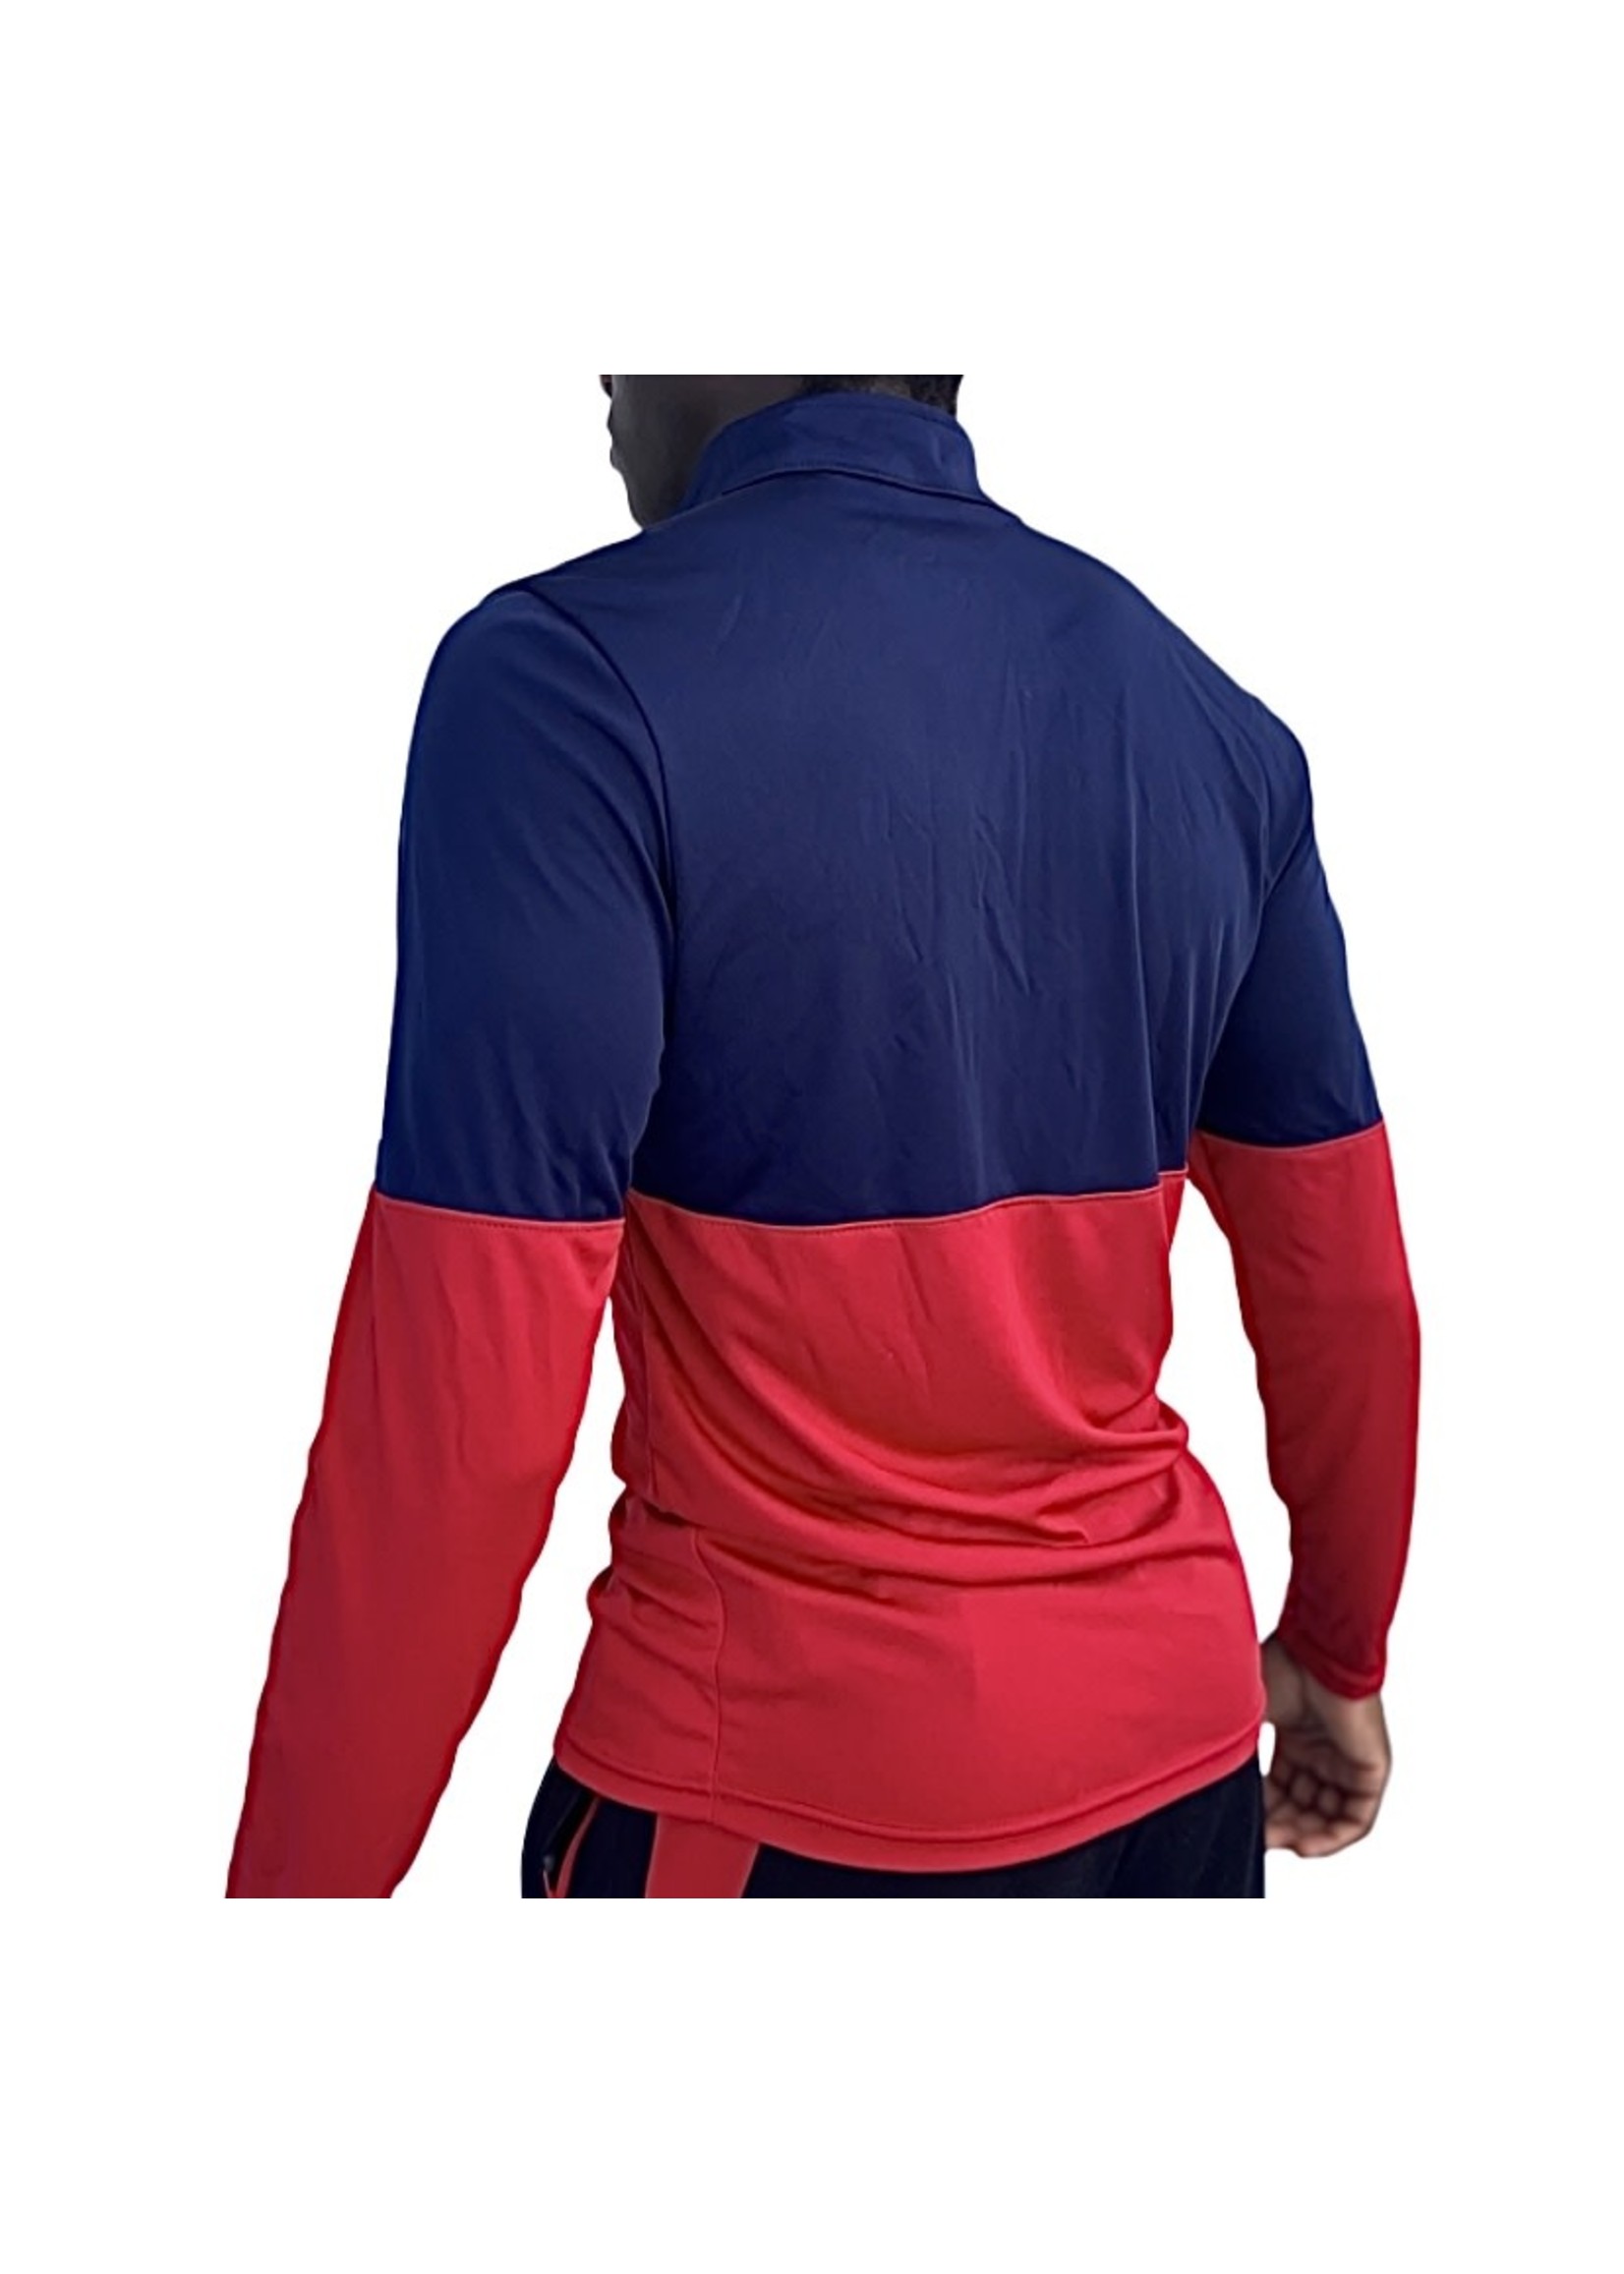 Momentum Team Pullover Navy/Red